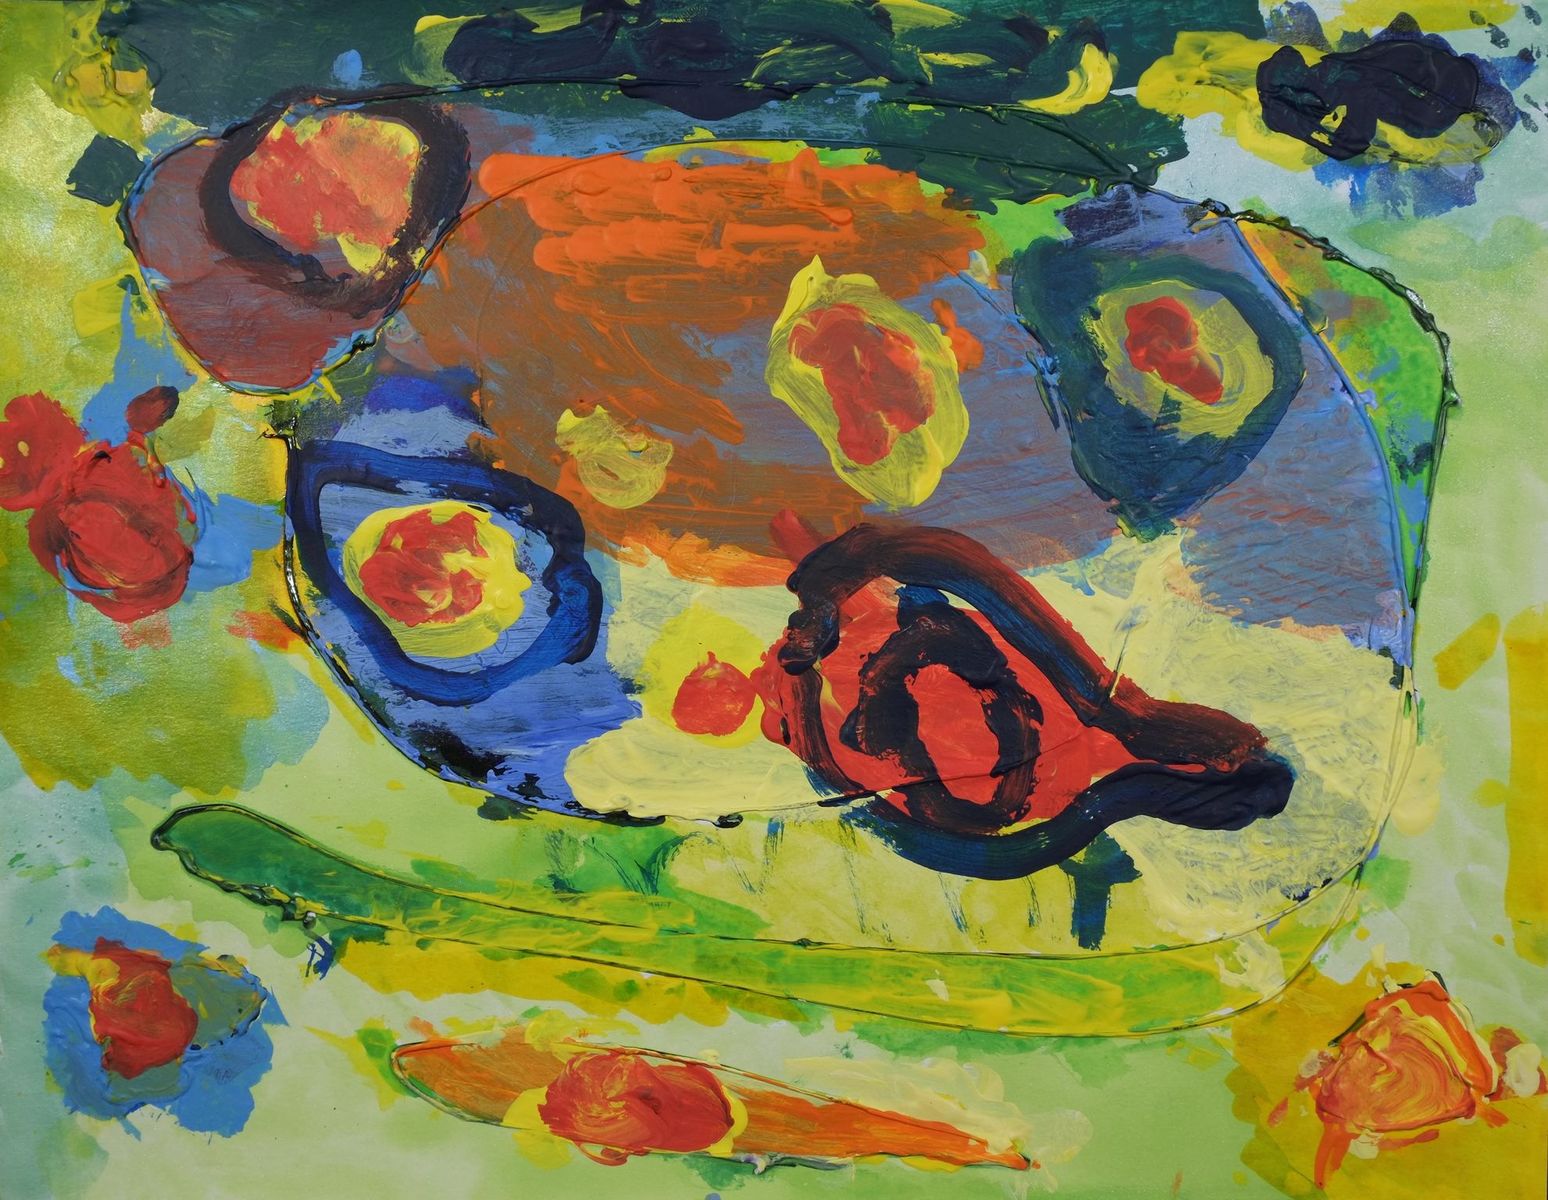 Acrylic and ink on paper artwork with a mostly light green background with small circles of blue, yellow and red with a larger orange oval in the center